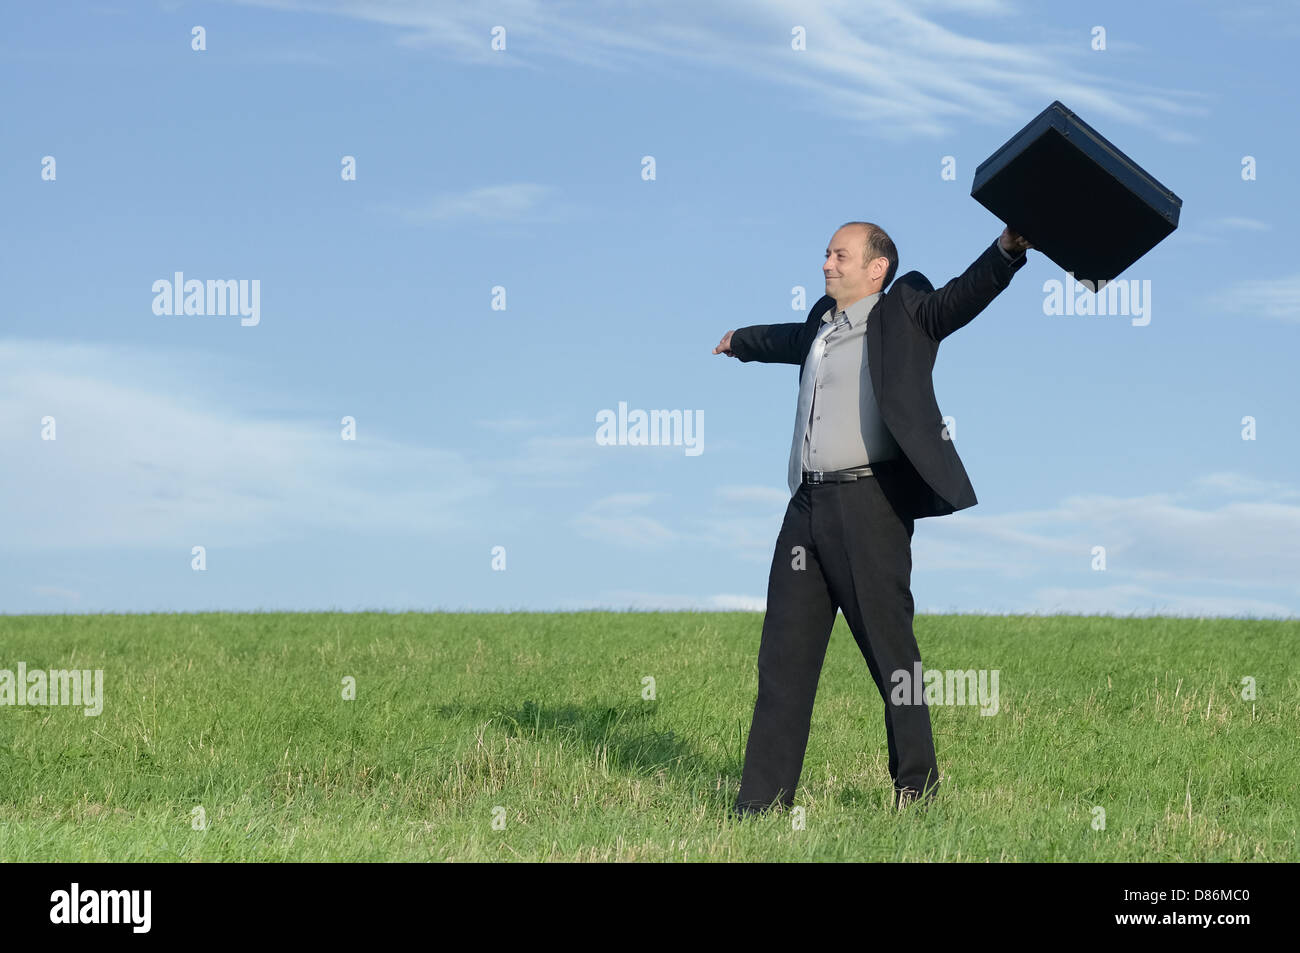 Businessman in tranquil nature scene enjoying freedom of success Stock Photo